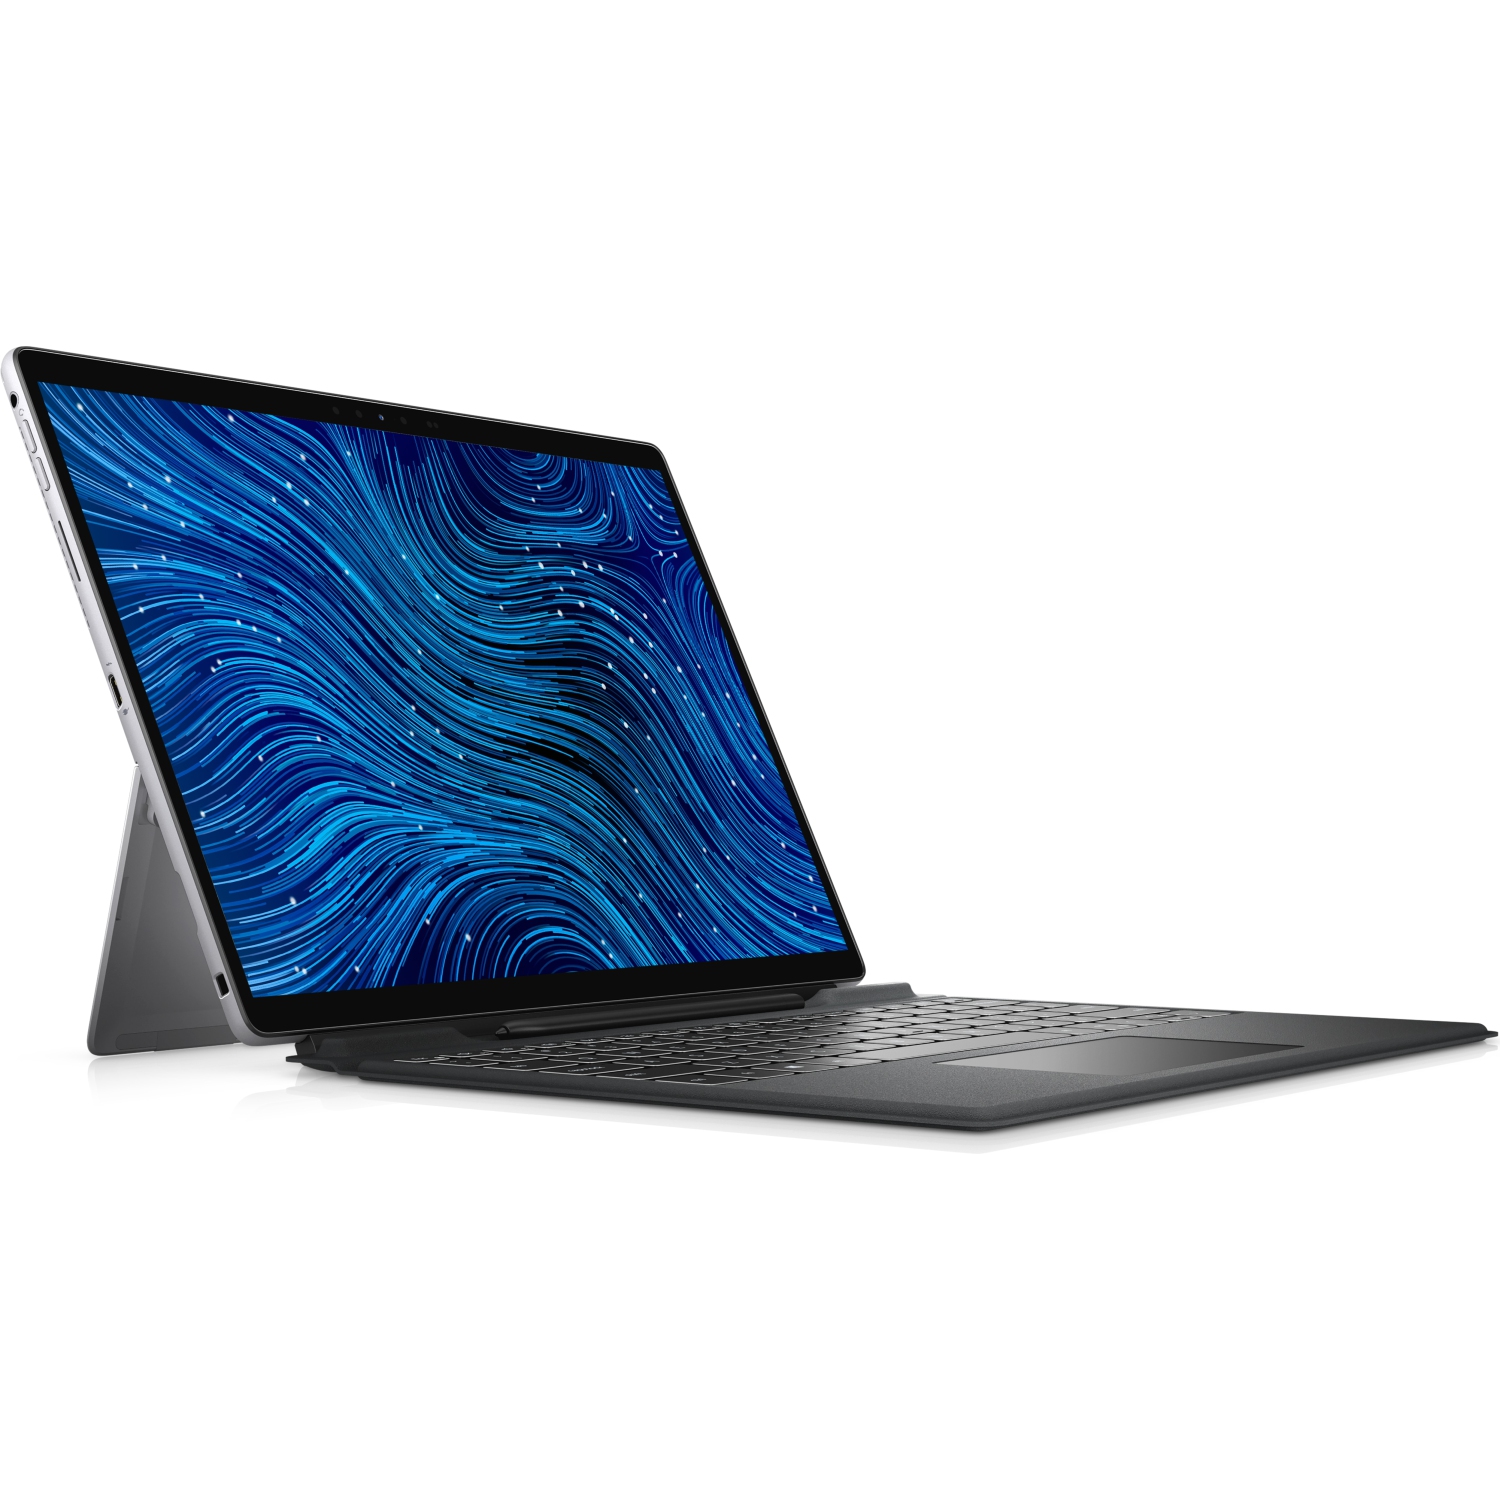 Refurbished (Excellent) - Dell Latitude 7000 7320 Detachable 13 2-in-1 (2021), 13" FHD+ Touch, Core i5, 256GB SSD, 8GB RAM, 4 Cores @ 4.2 GHz, 11th Gen CPU Certified